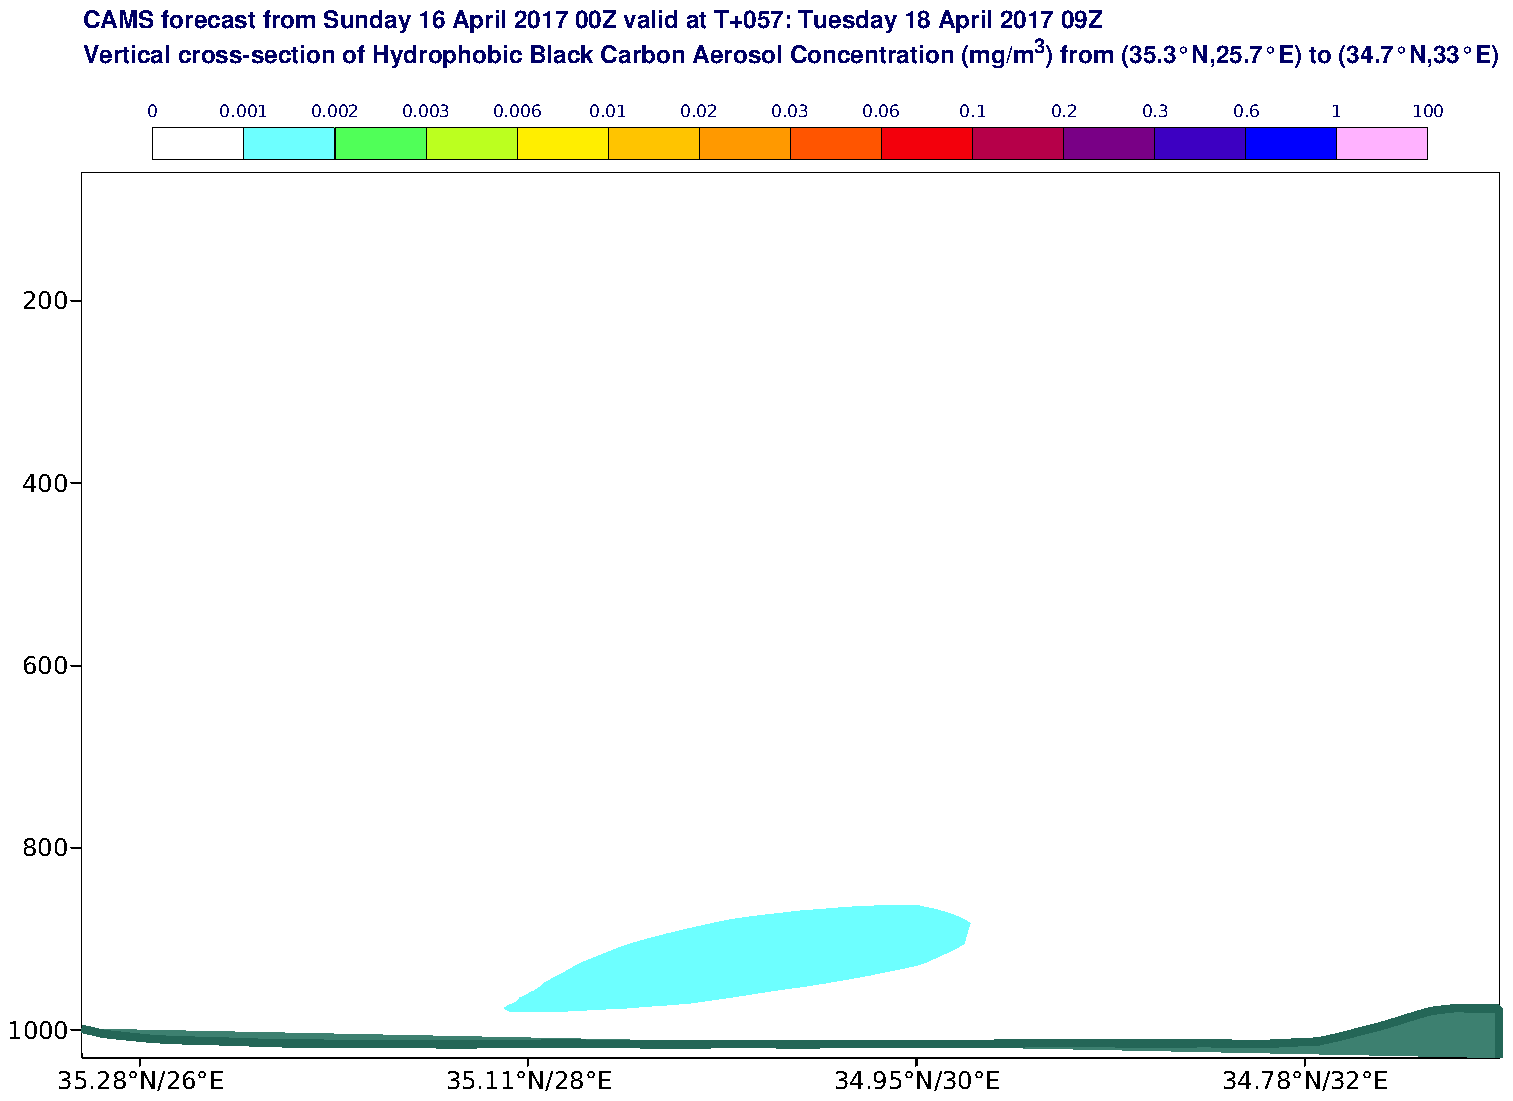 Vertical cross-section of Hydrophobic Black Carbon Aerosol Concentration (mg/m3) valid at T57 - 2017-04-18 09:00